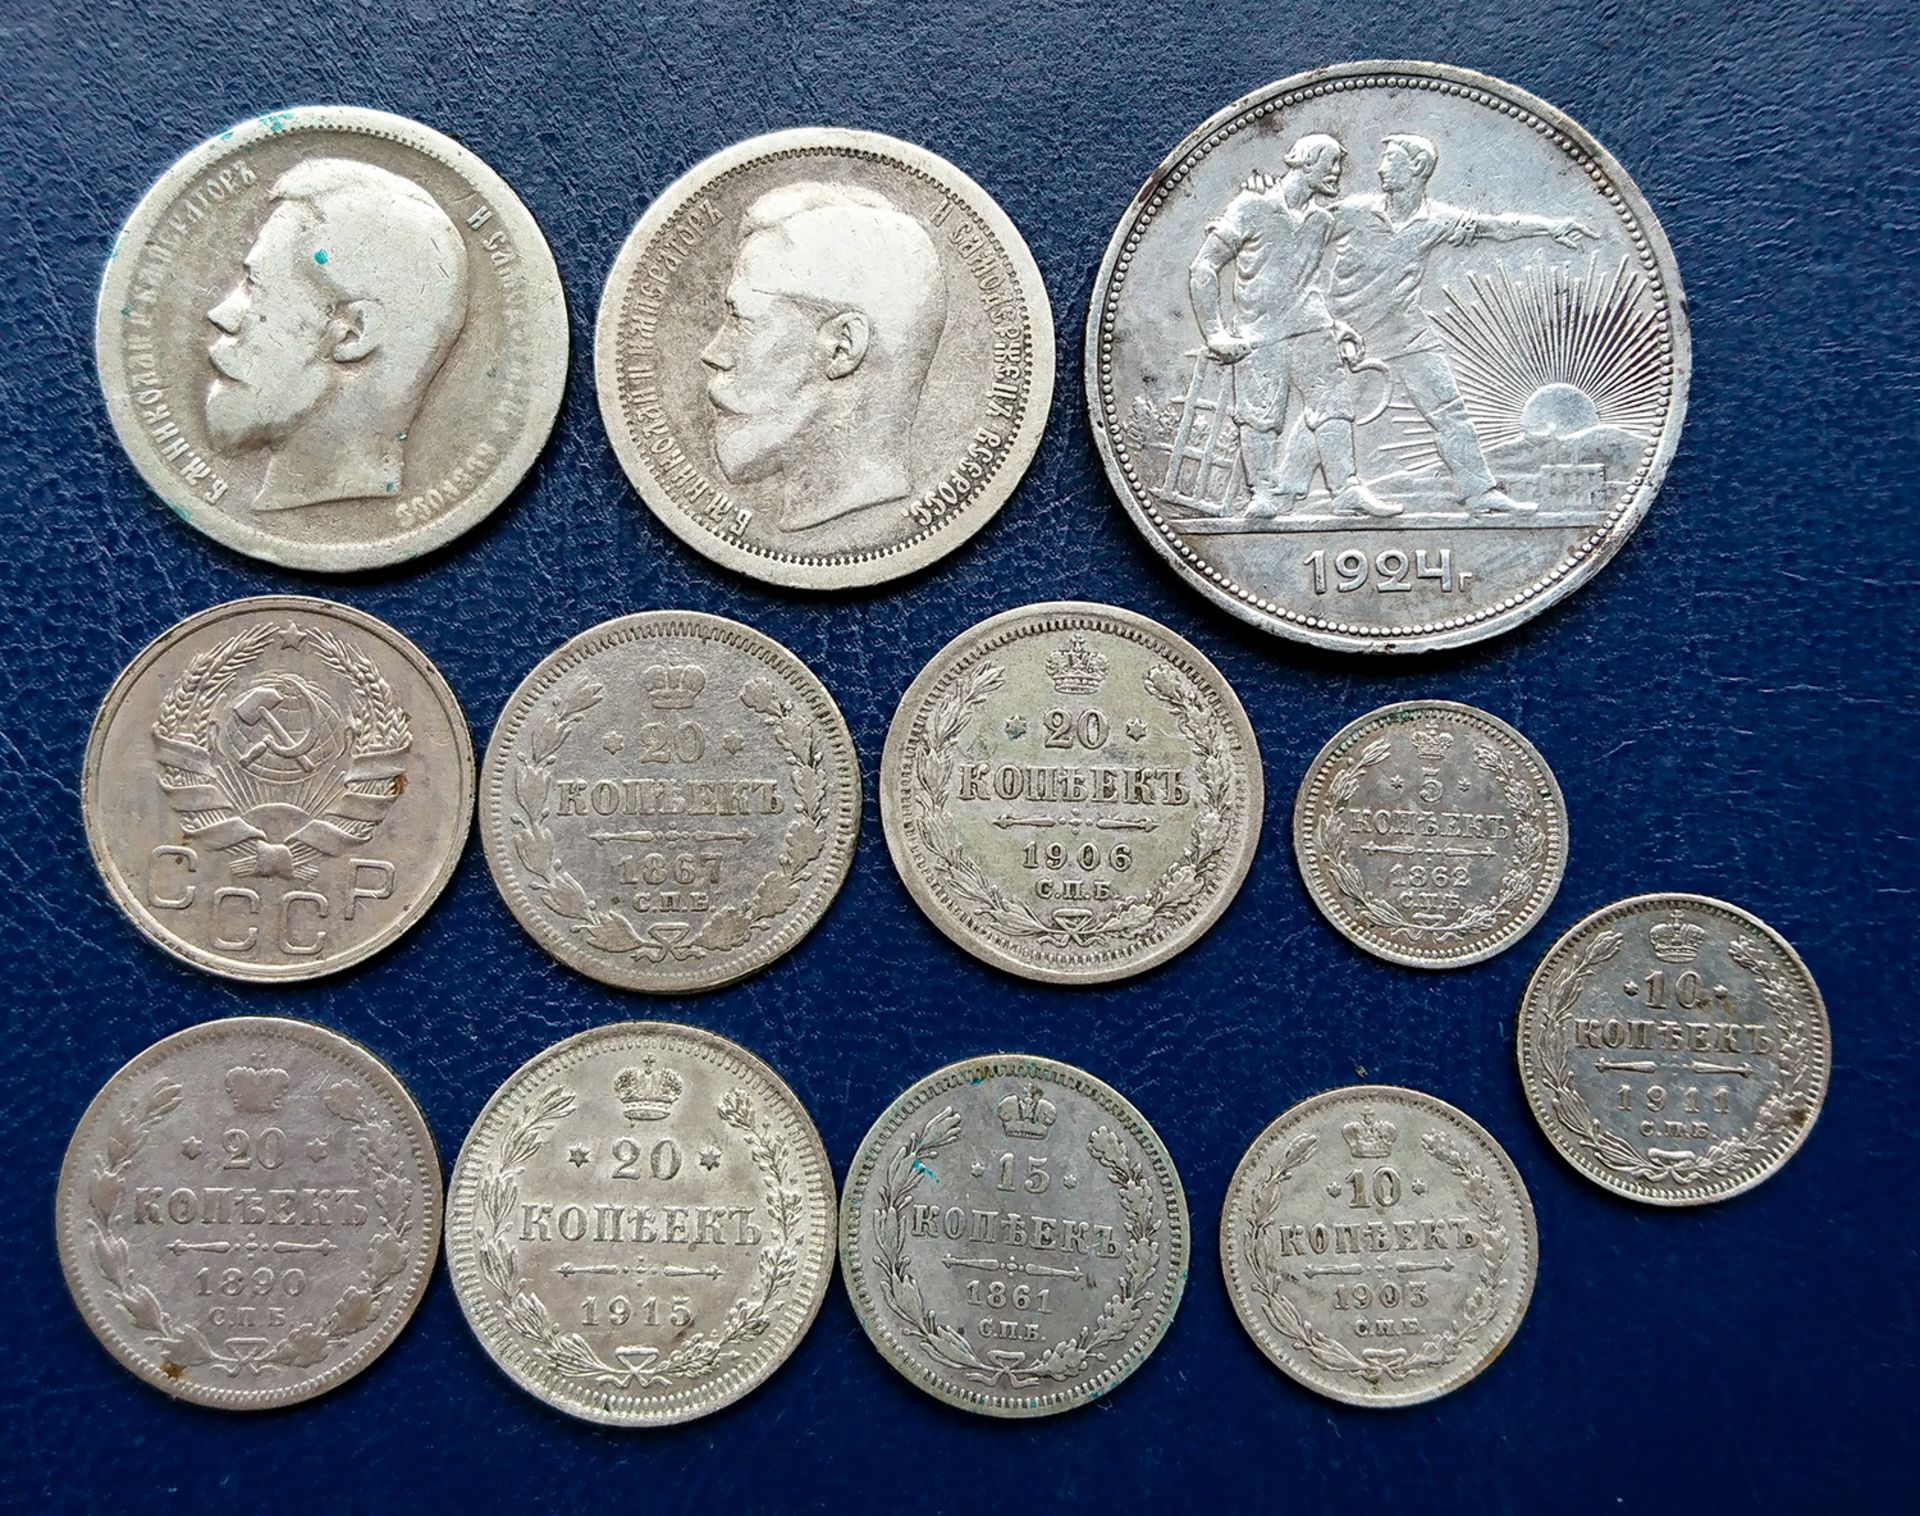 Russia - Silver & Copper Roubles / Kopeks etc. (14) from 1794, some good grades. - Image 2 of 4